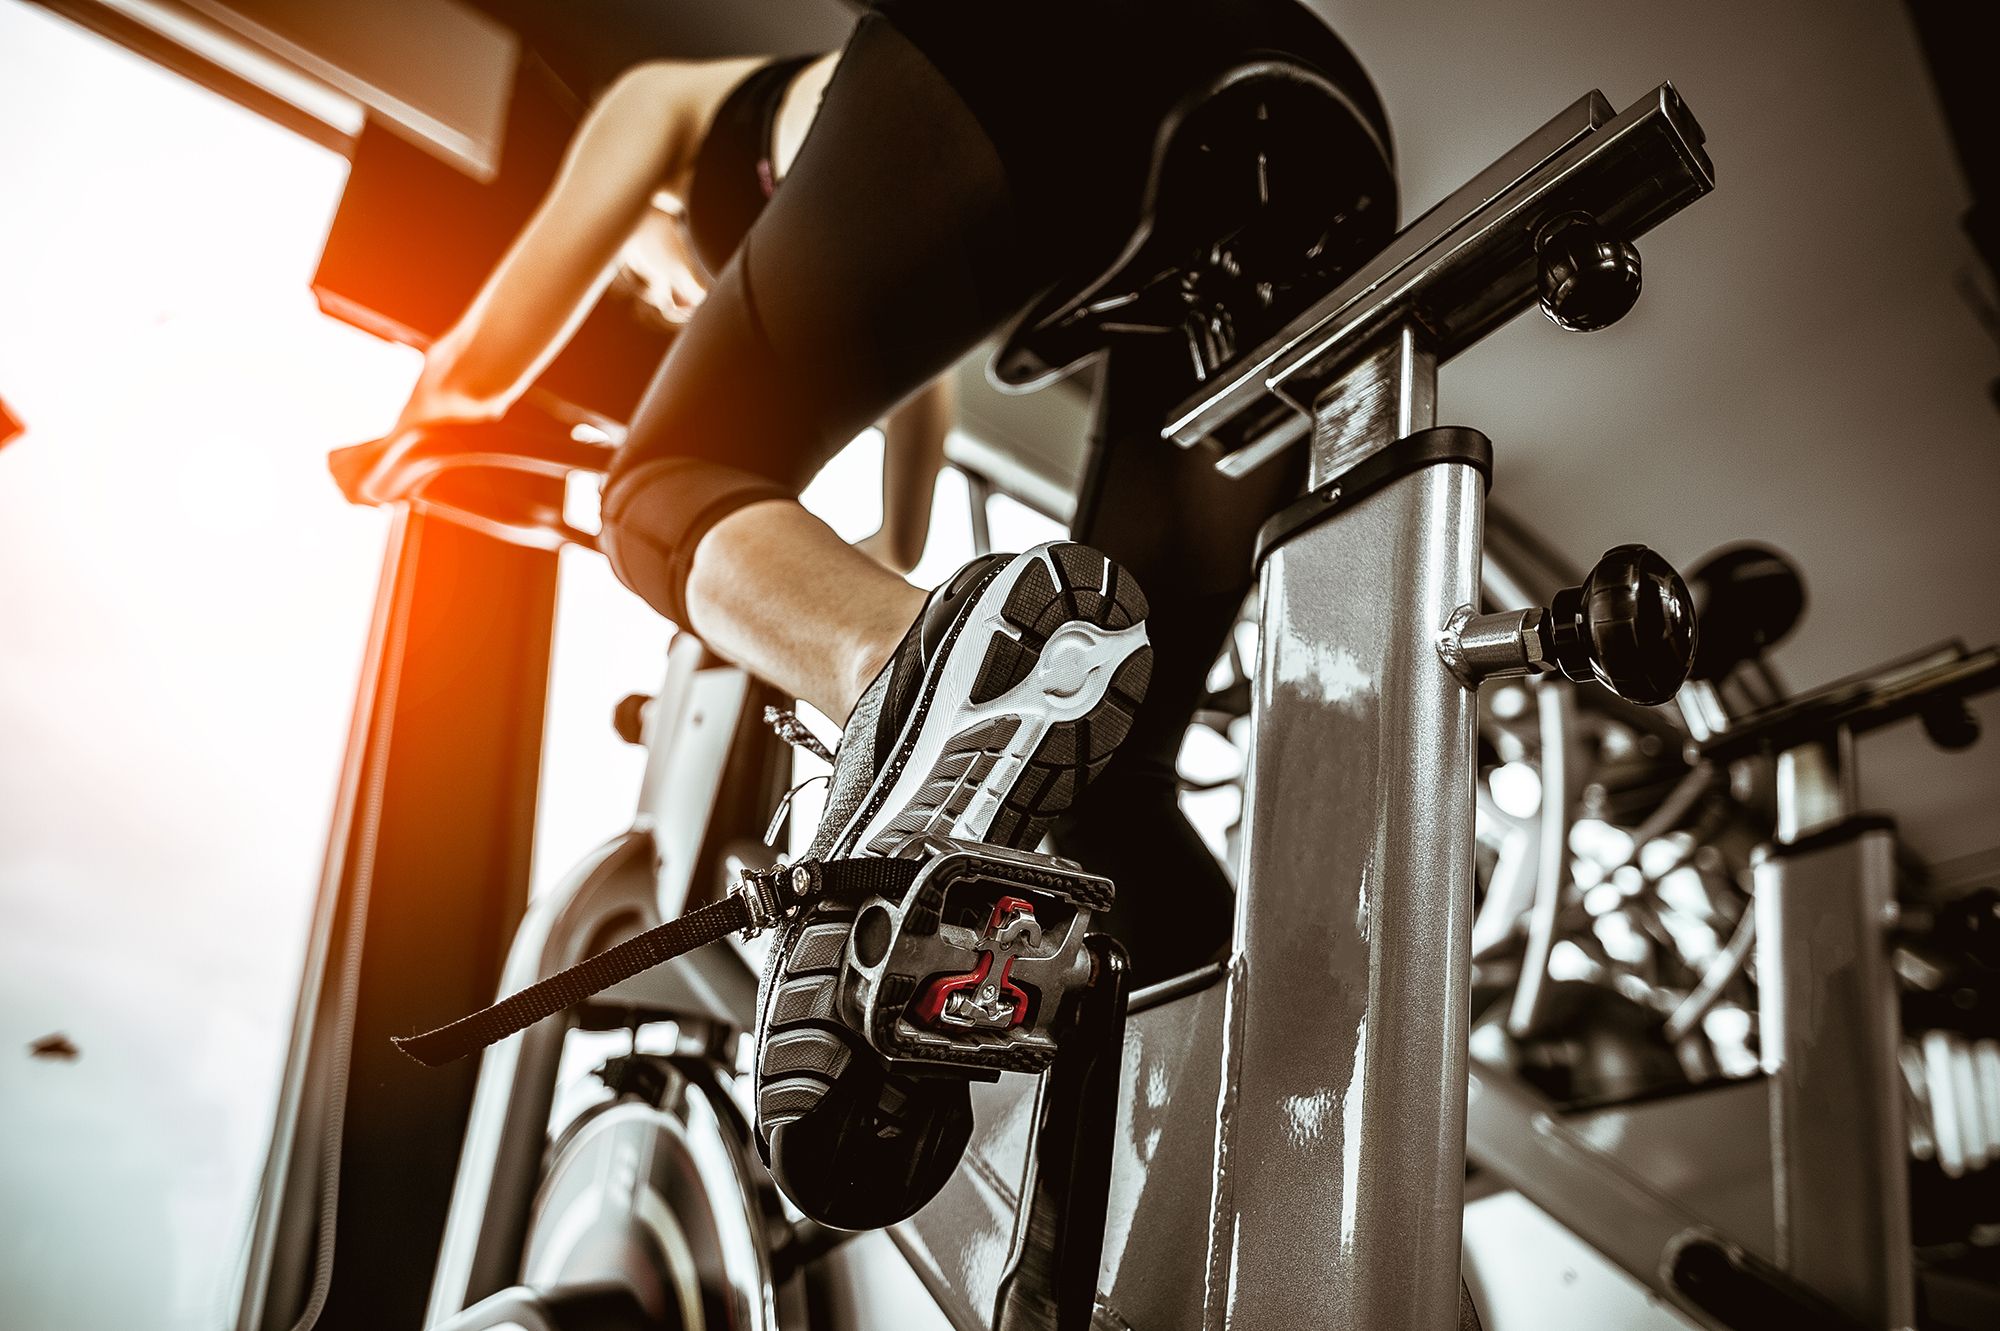 Spinning: Psycle spin class body transformation